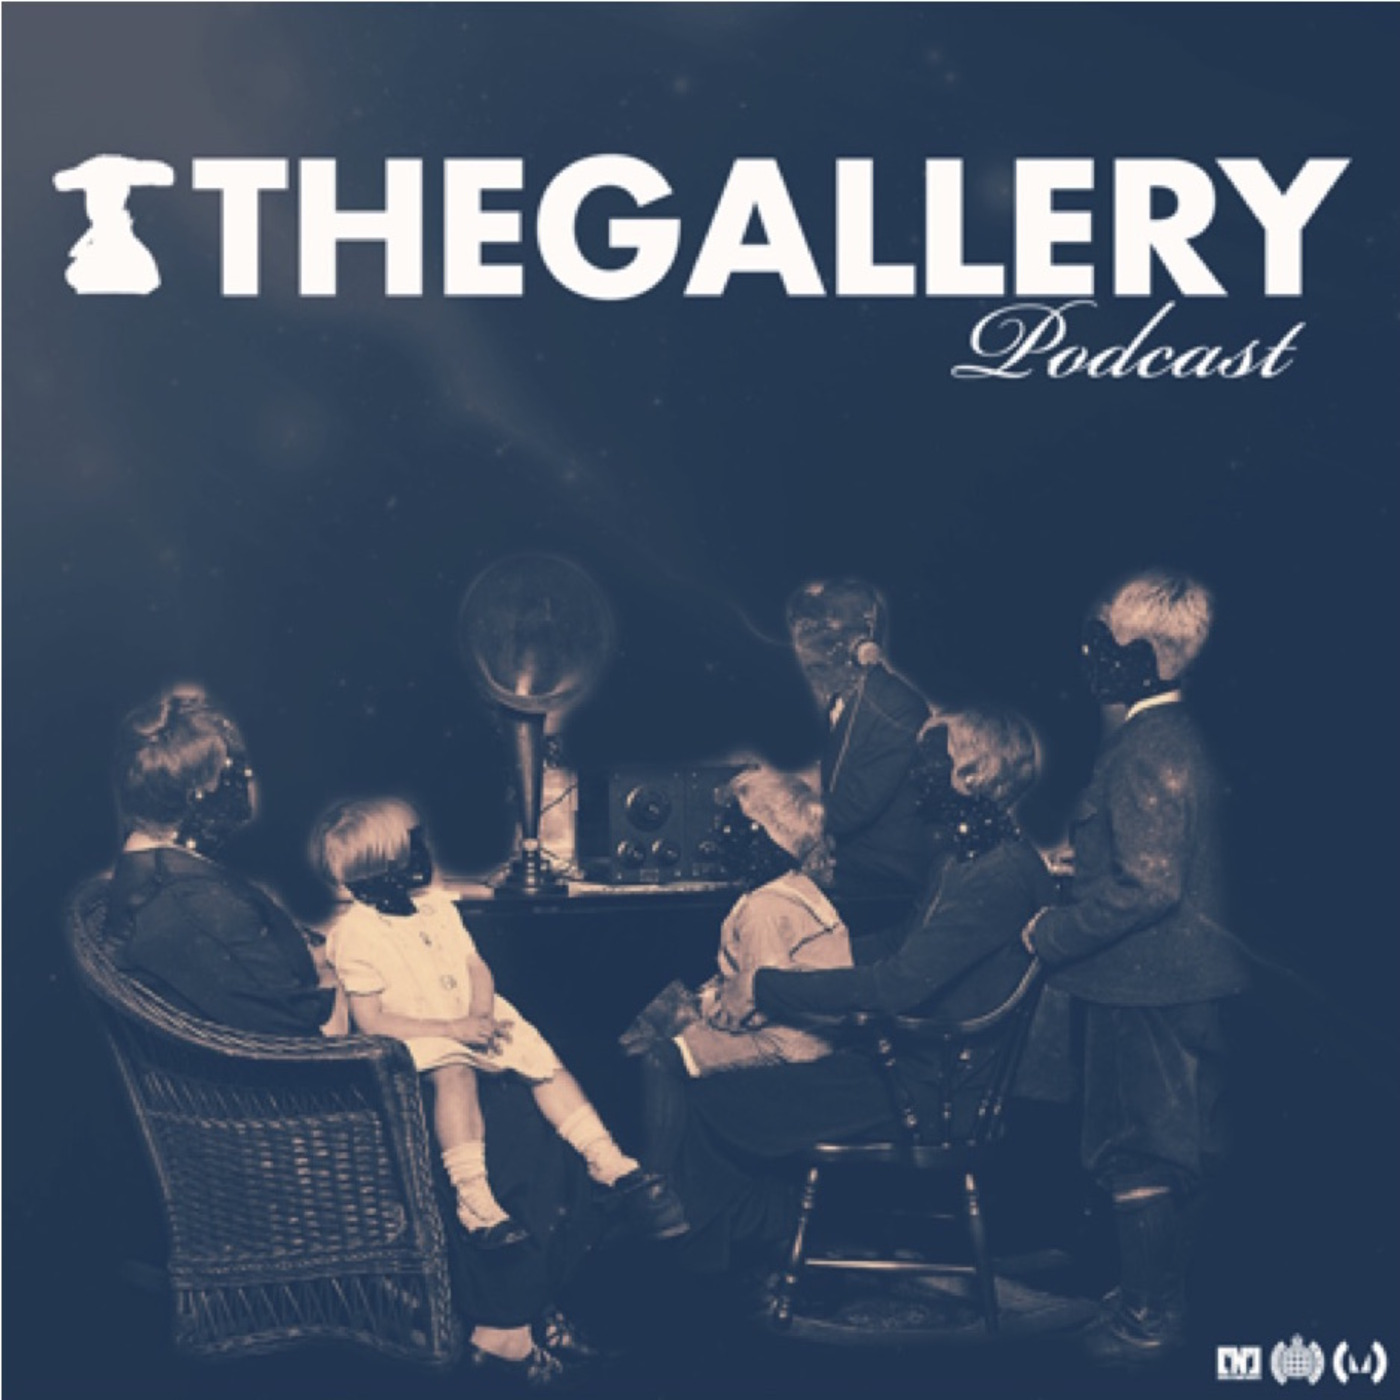  The Gallery Podcast Episode 175 W/ Tristan D + Open Up Special Edition